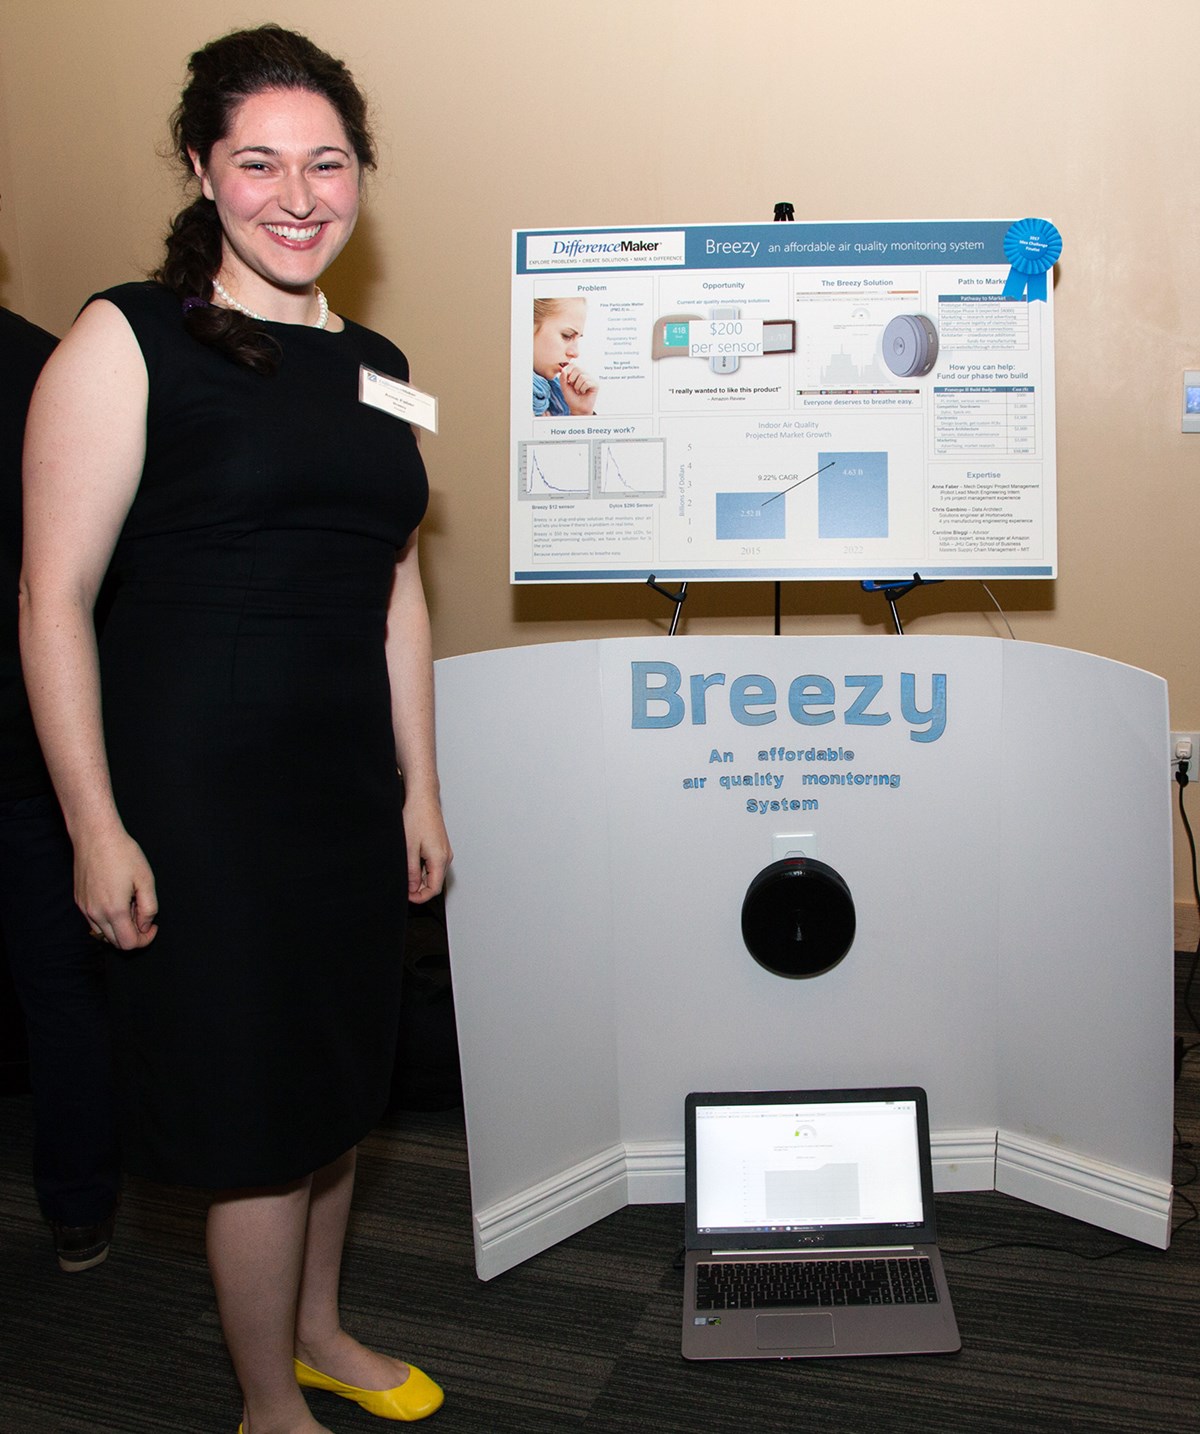 Breezy is a real-time air quality-monitoring device, which can be tracked through its cell phone application or online website.